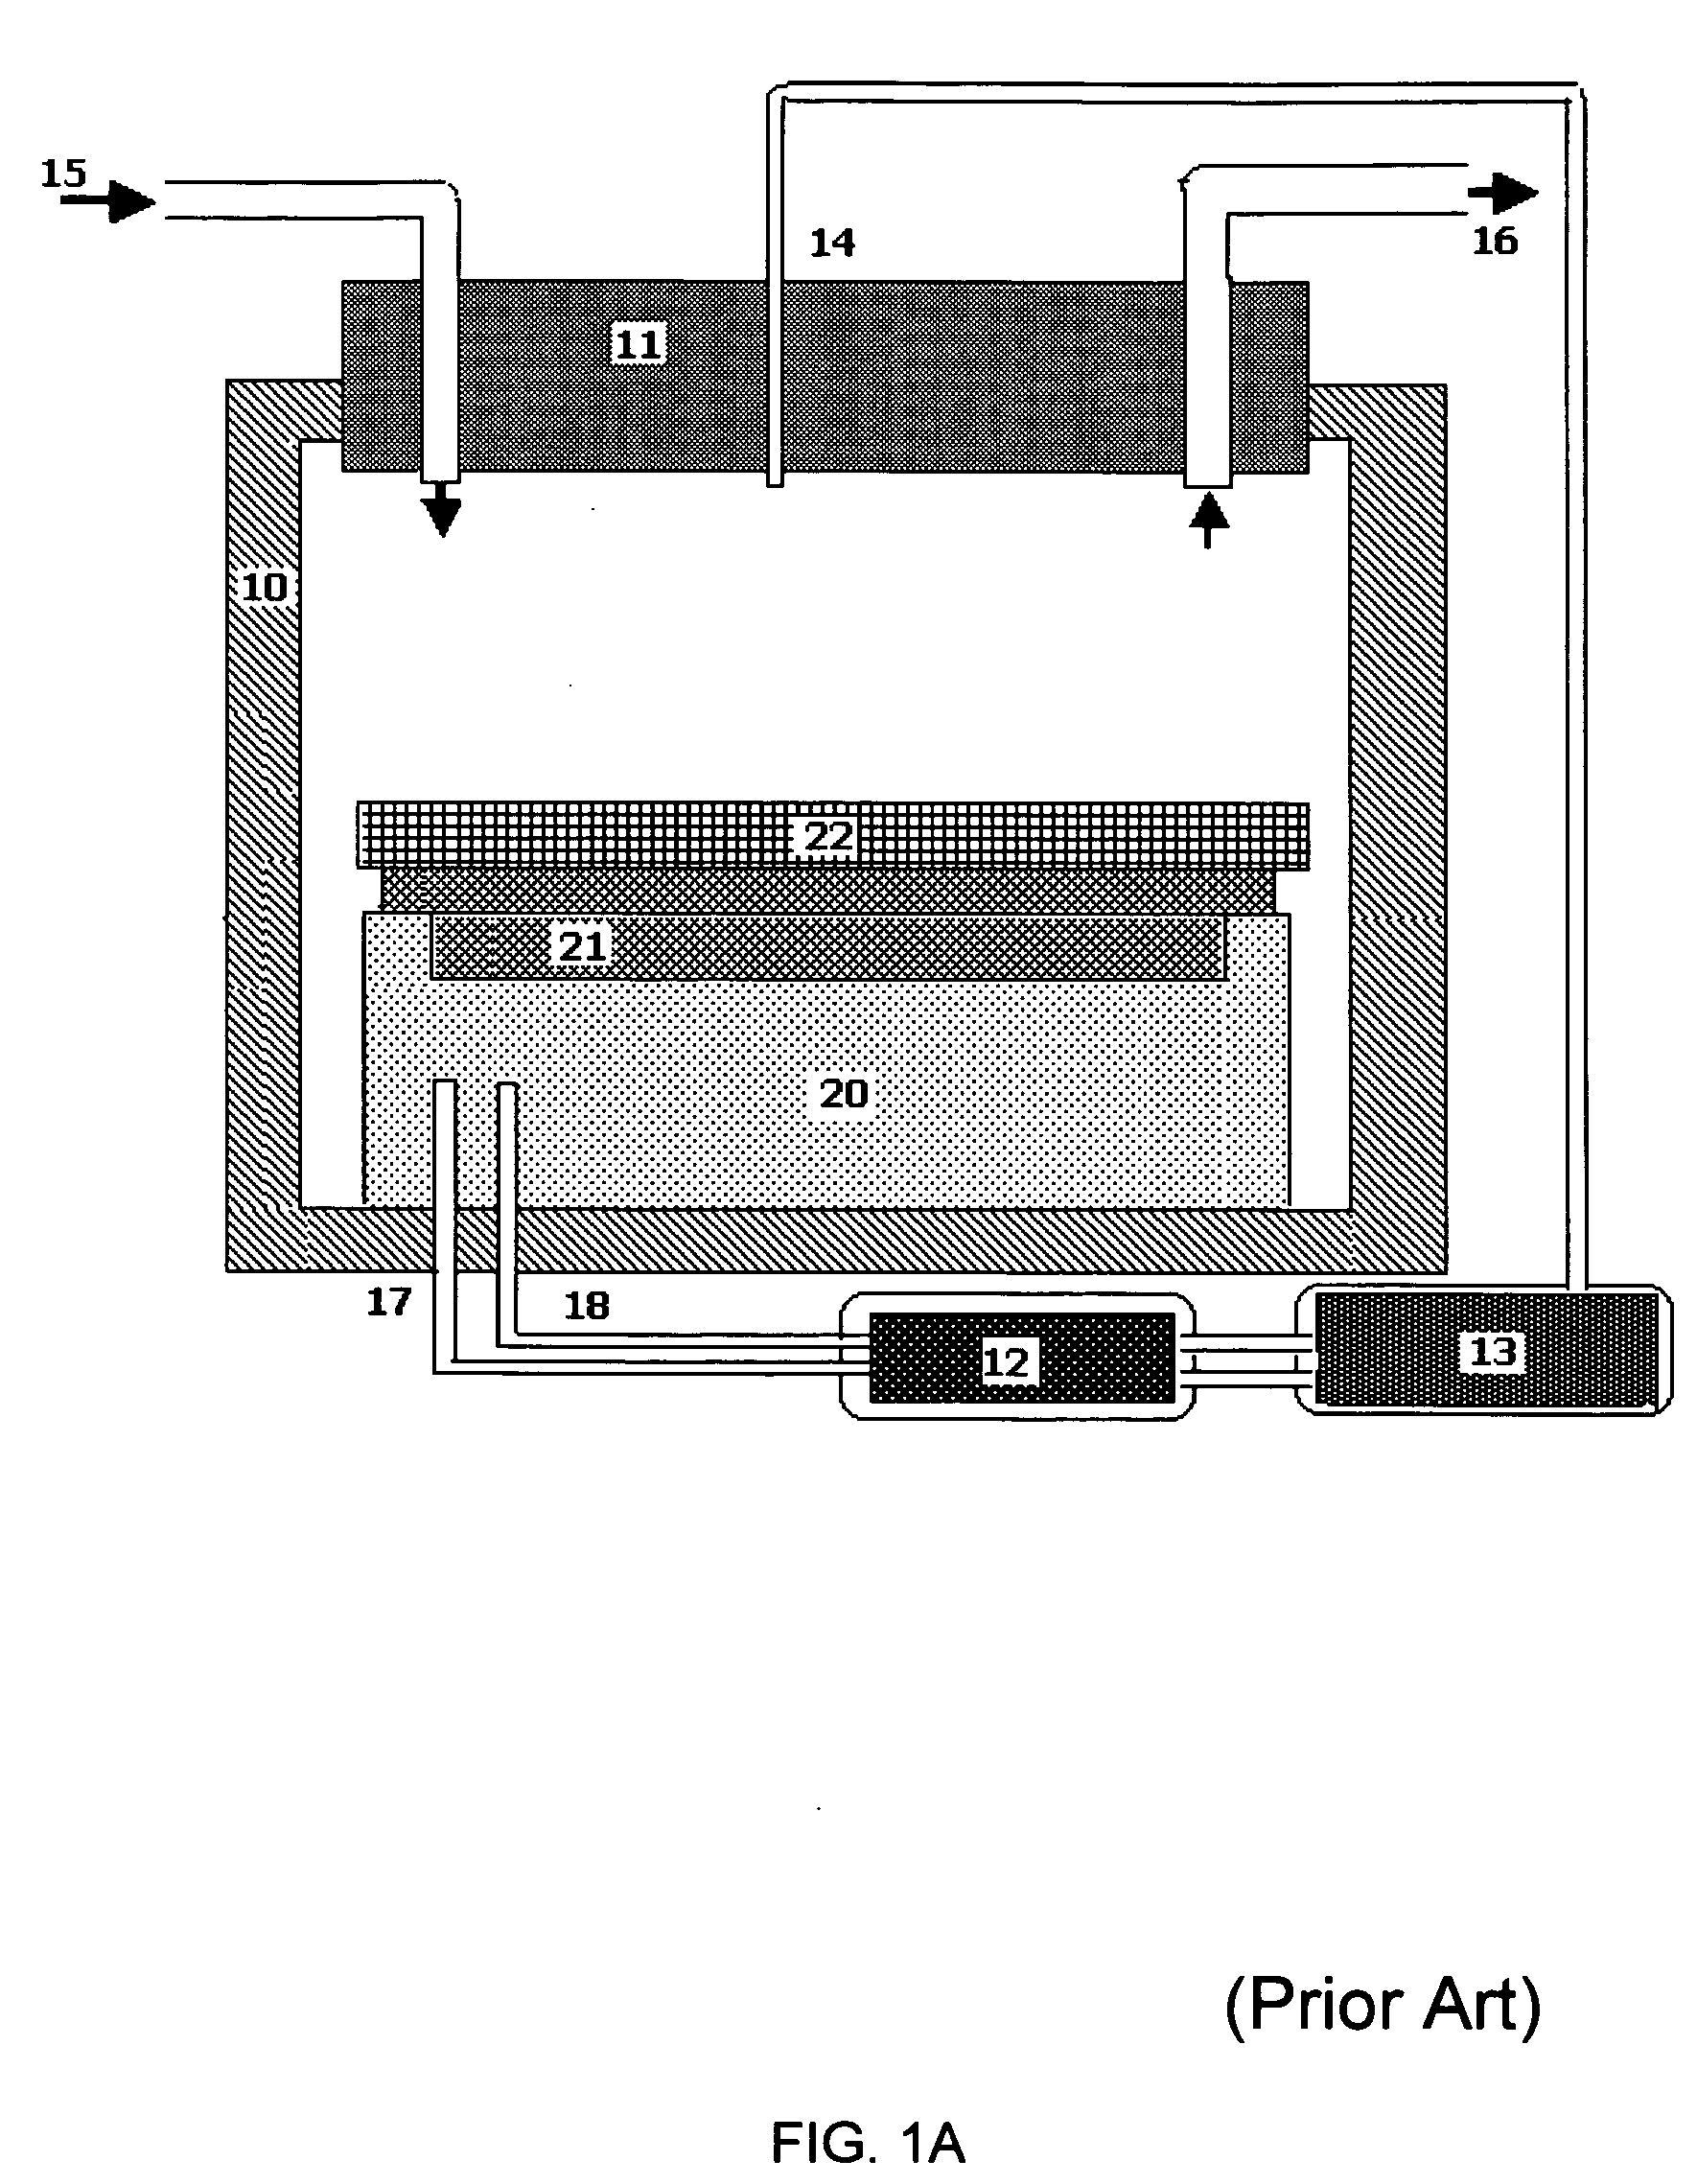 Method and apparatuses for high pressure gas annealing